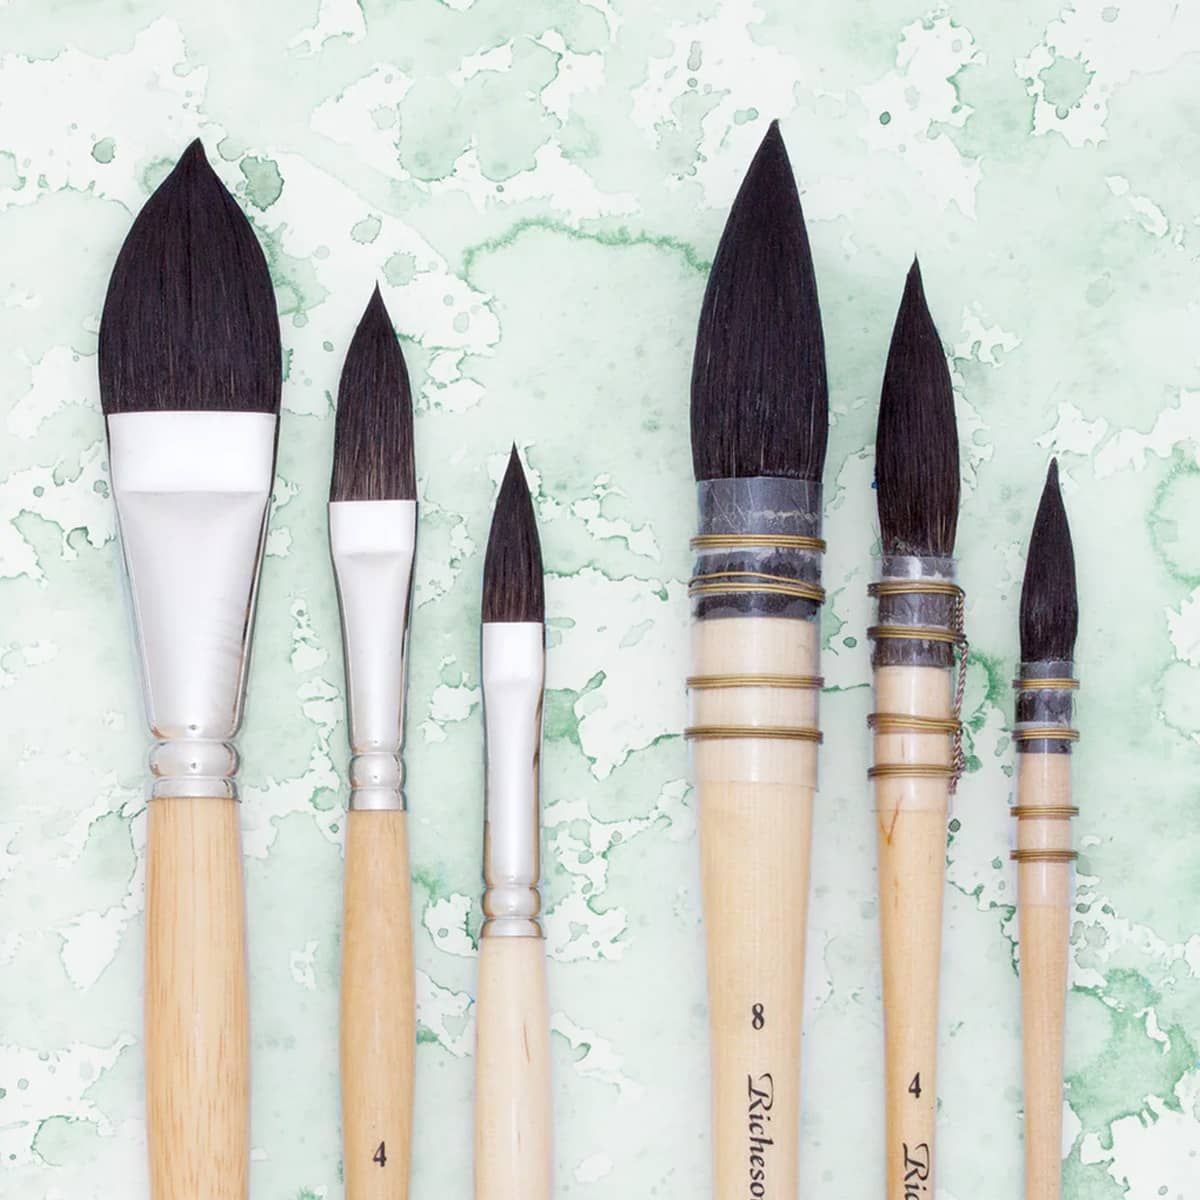 Perfect for painting with watercolor!